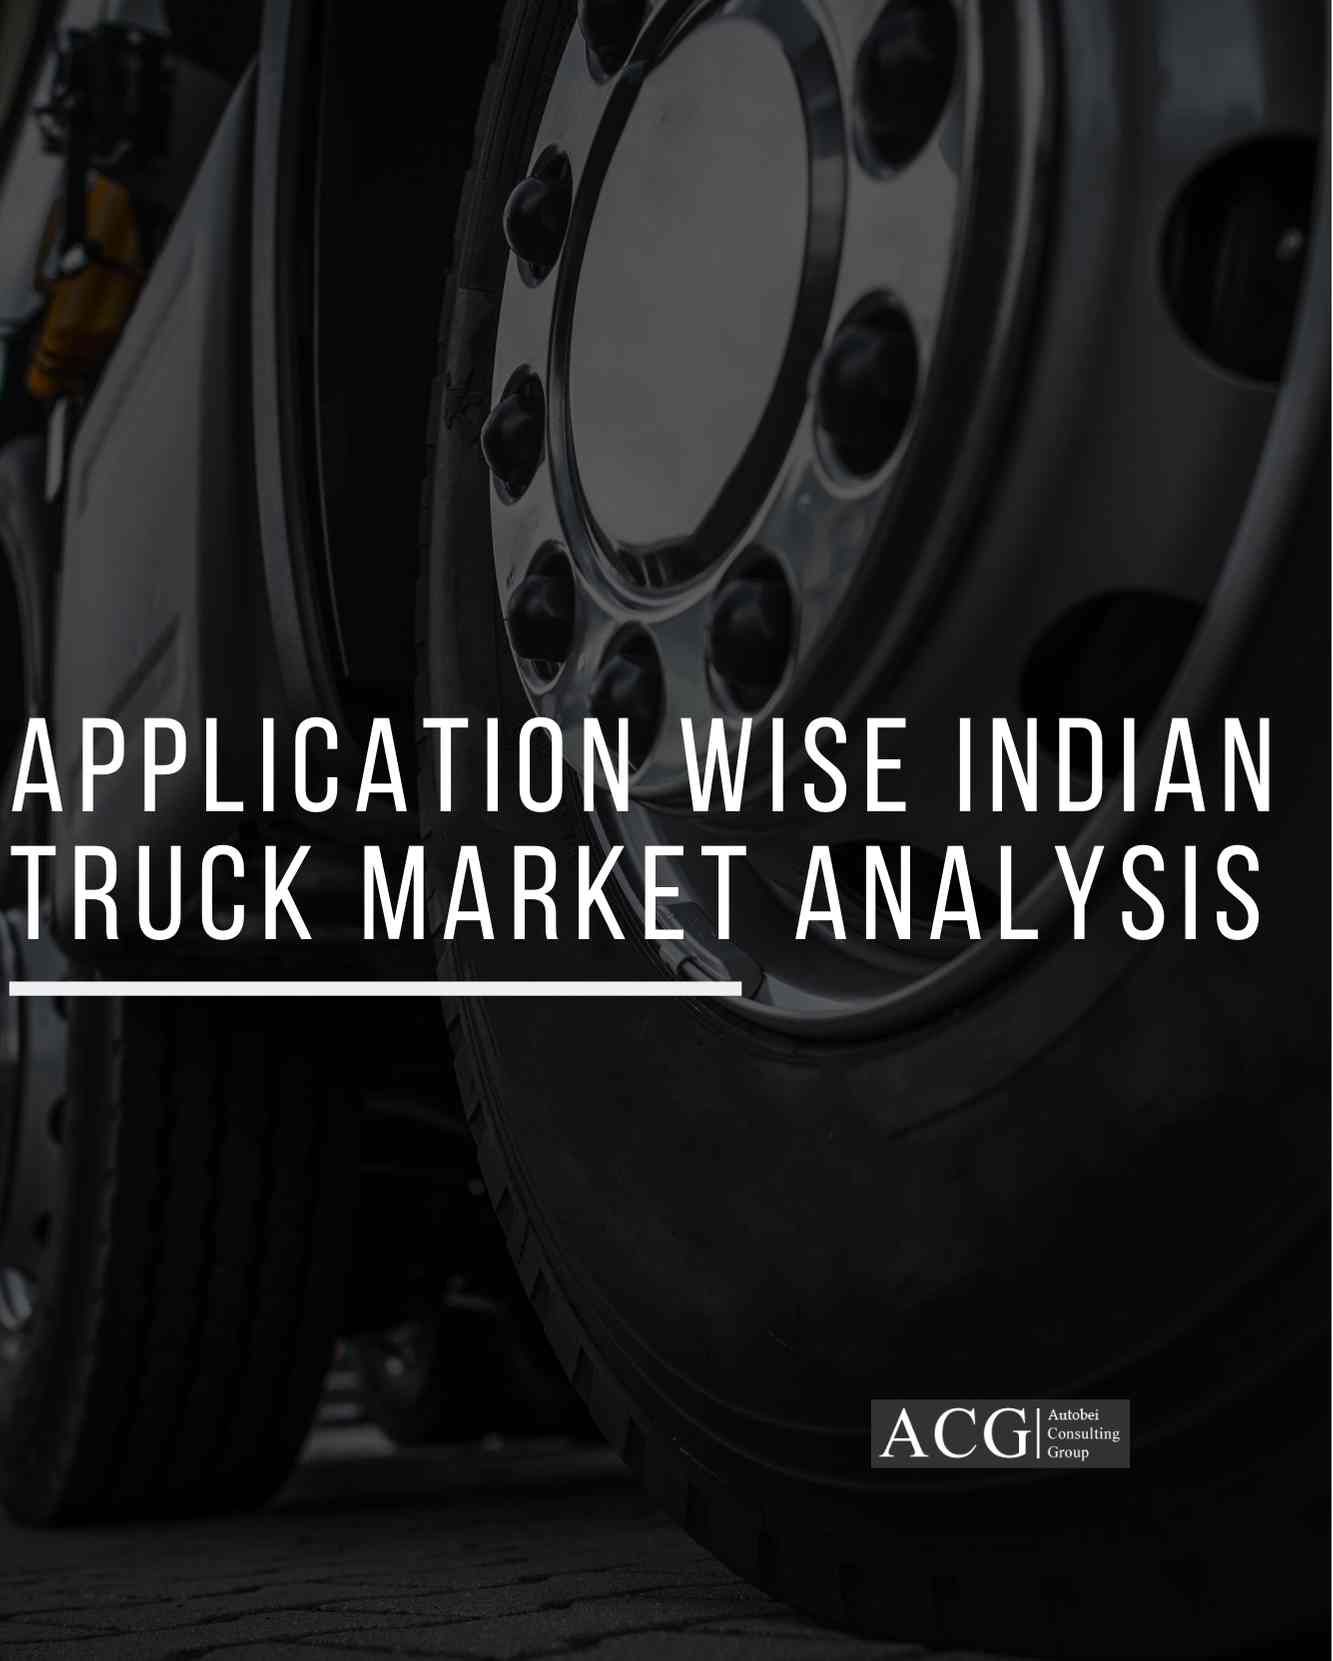 Application wise Indian Truck Market report